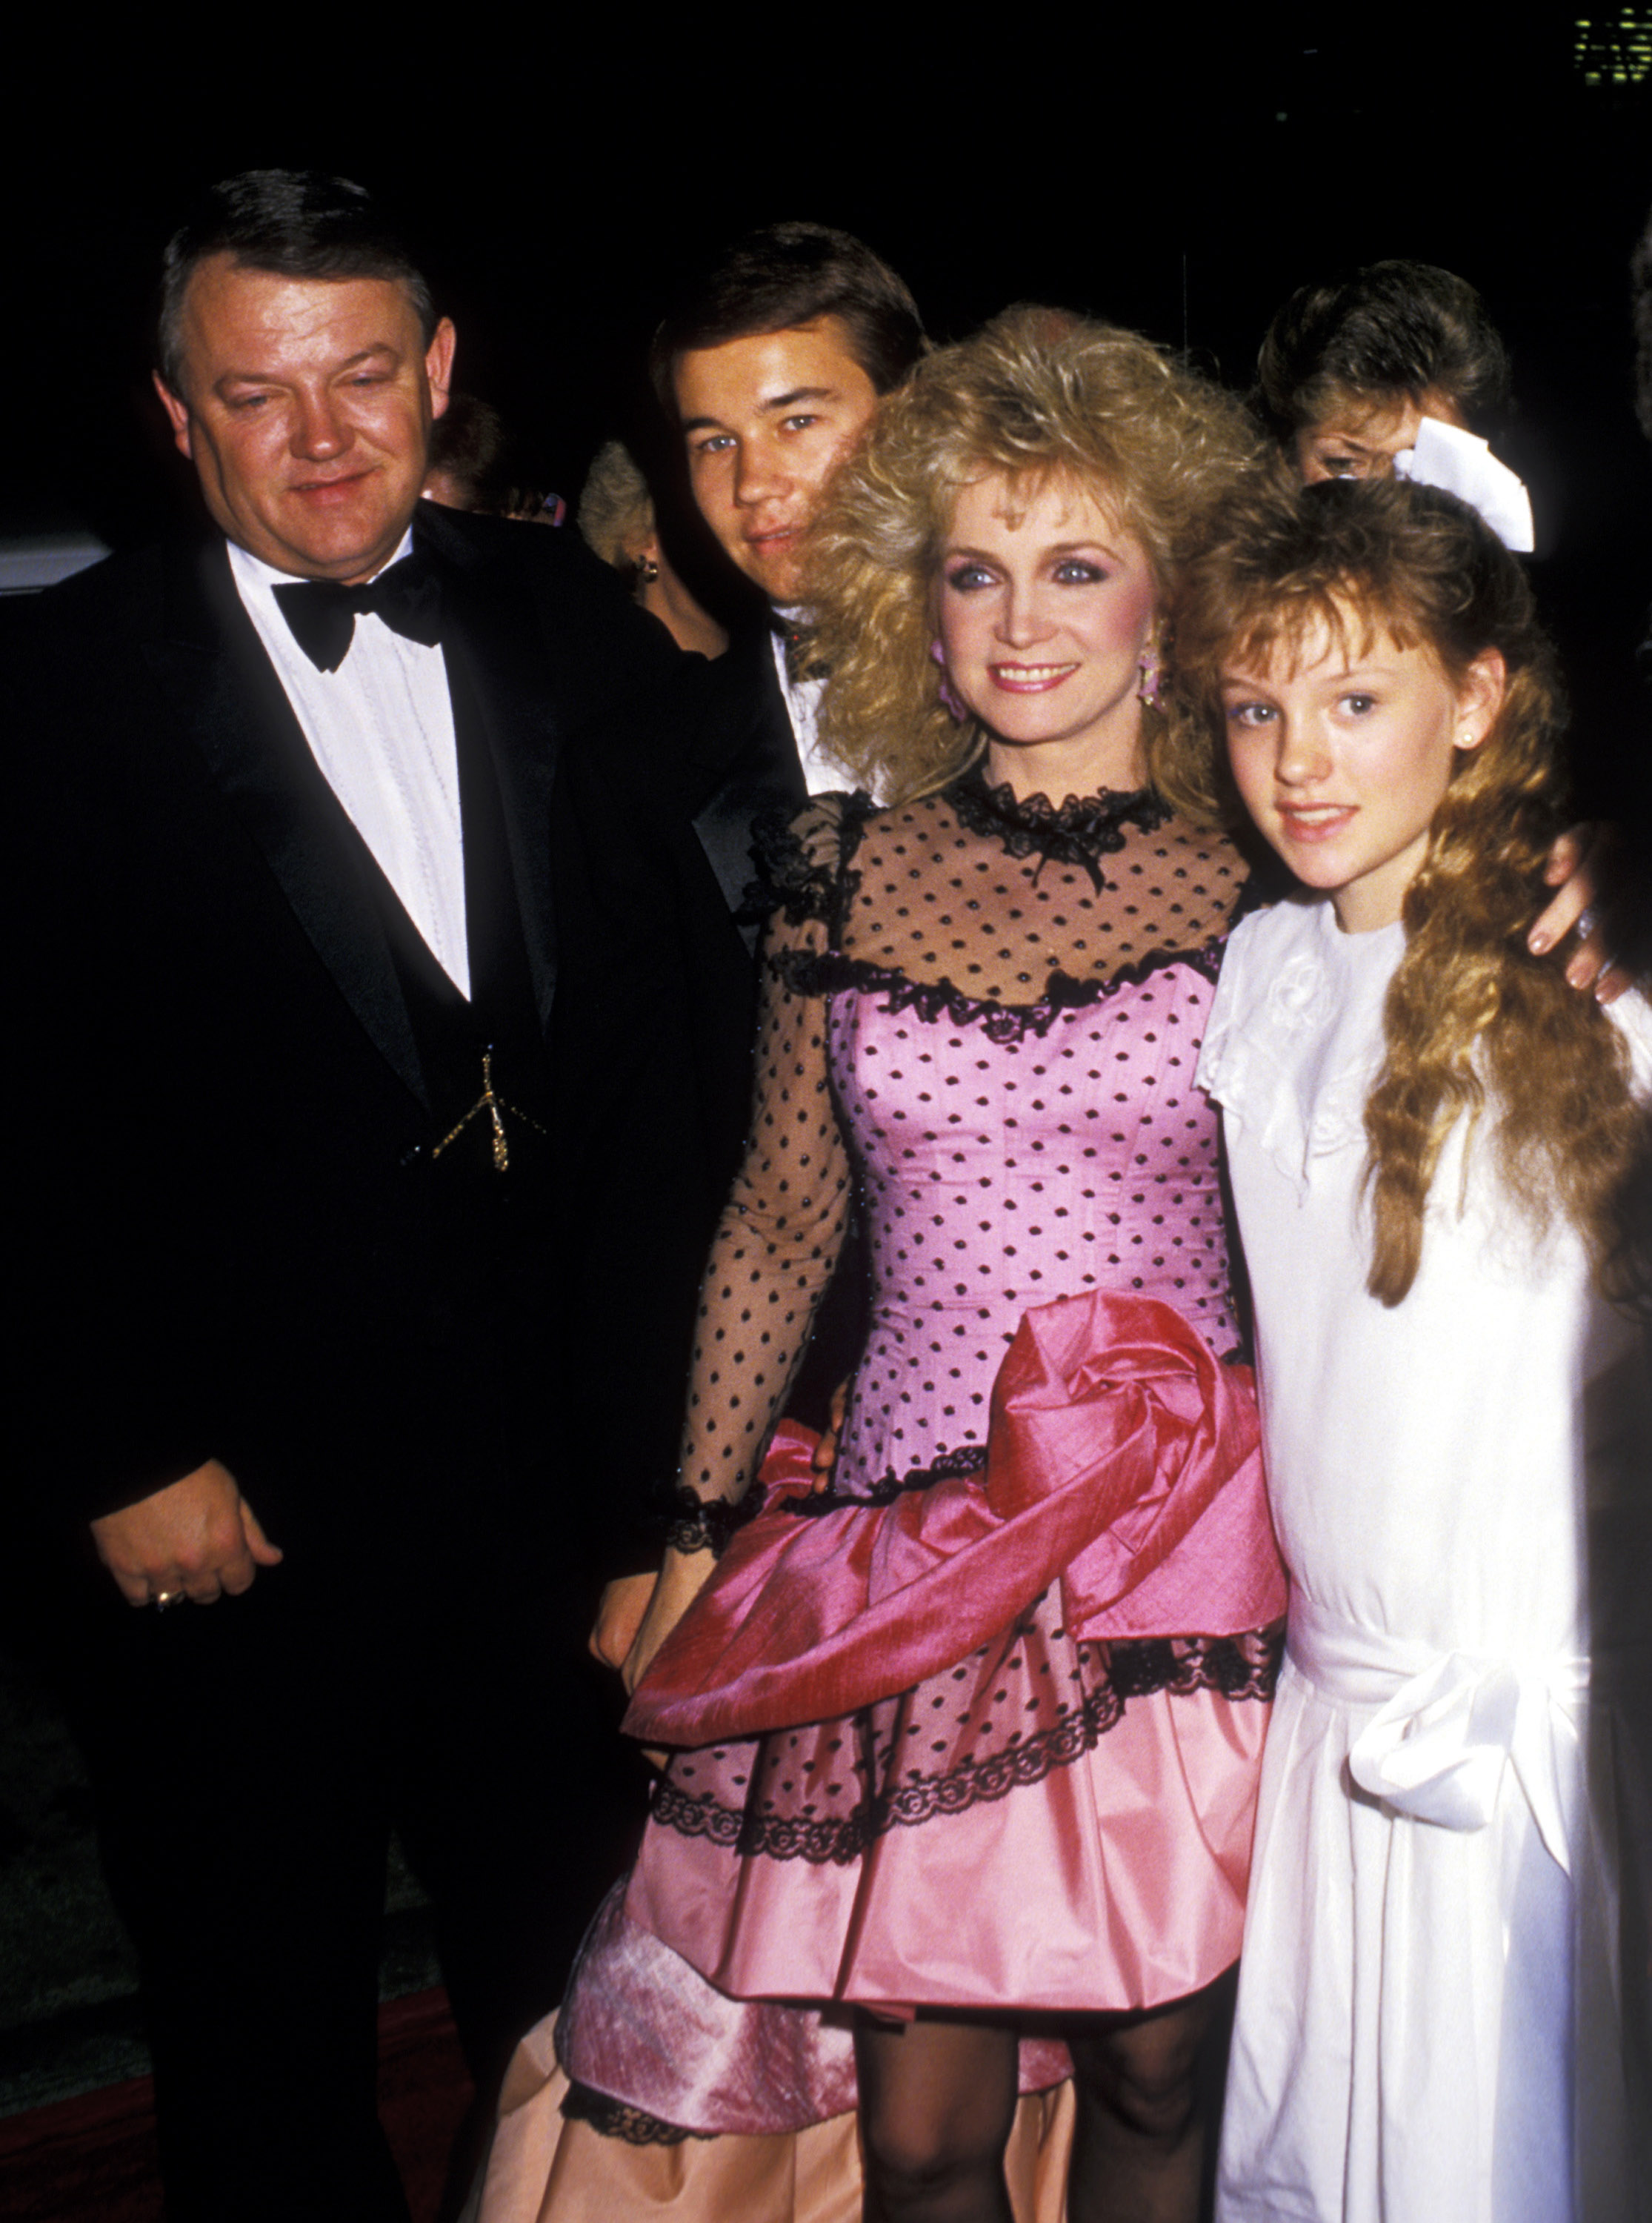 Ken Dudney, Matthew Dudney, Barbara Mandrell, and Jaime Nicole Dudney at the after-party for the 14th Annual People's Choice Awards on March 13, 1988 | Source: Getty Images